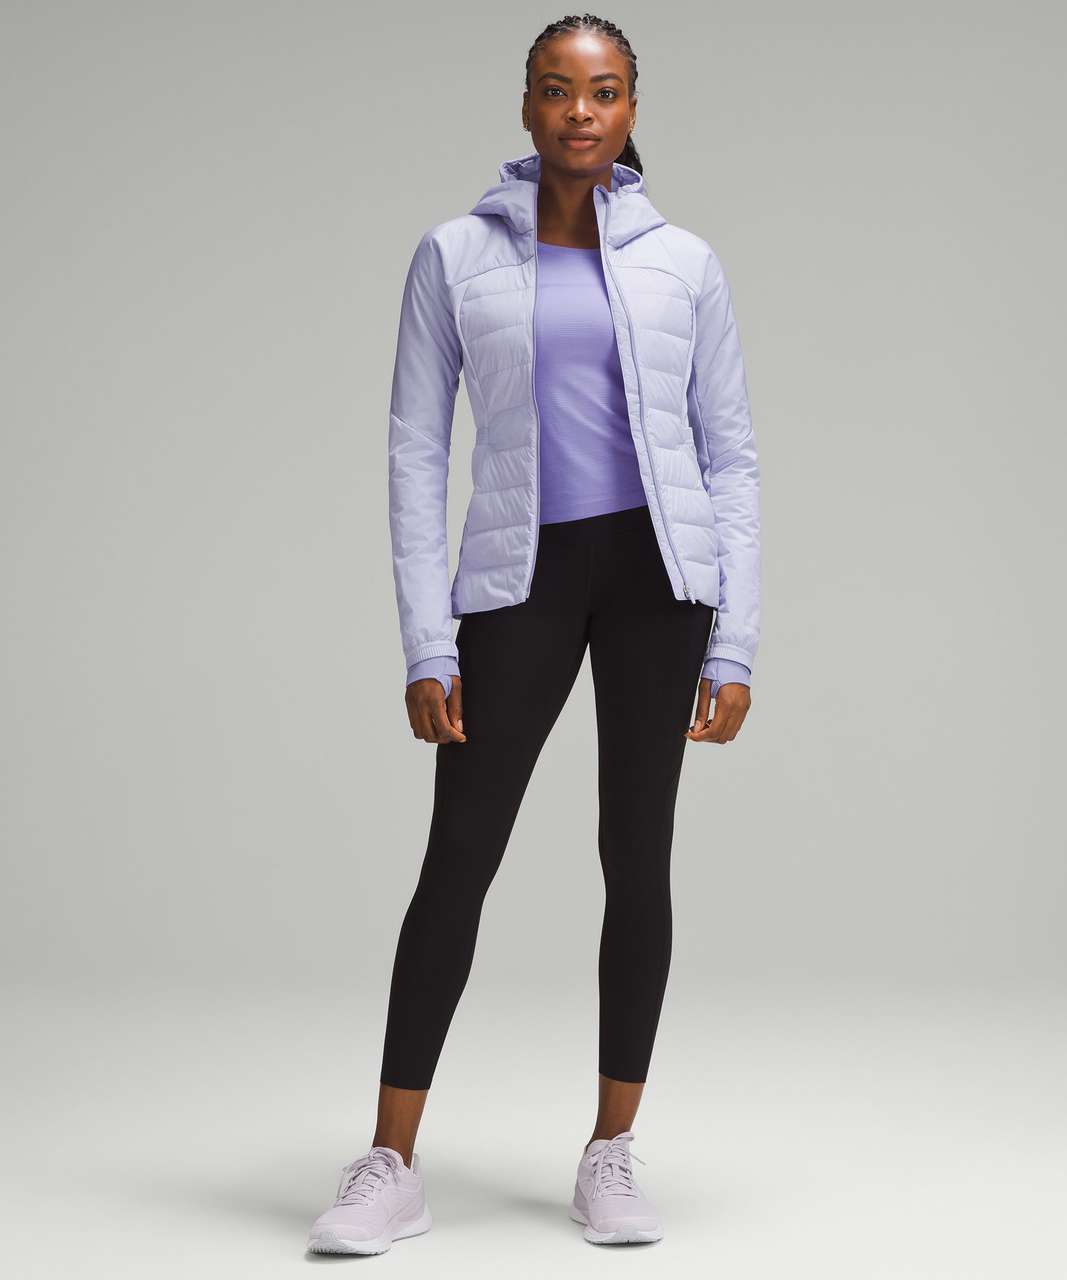 Lululemon Down for It All Jacket - Lilac Smoke